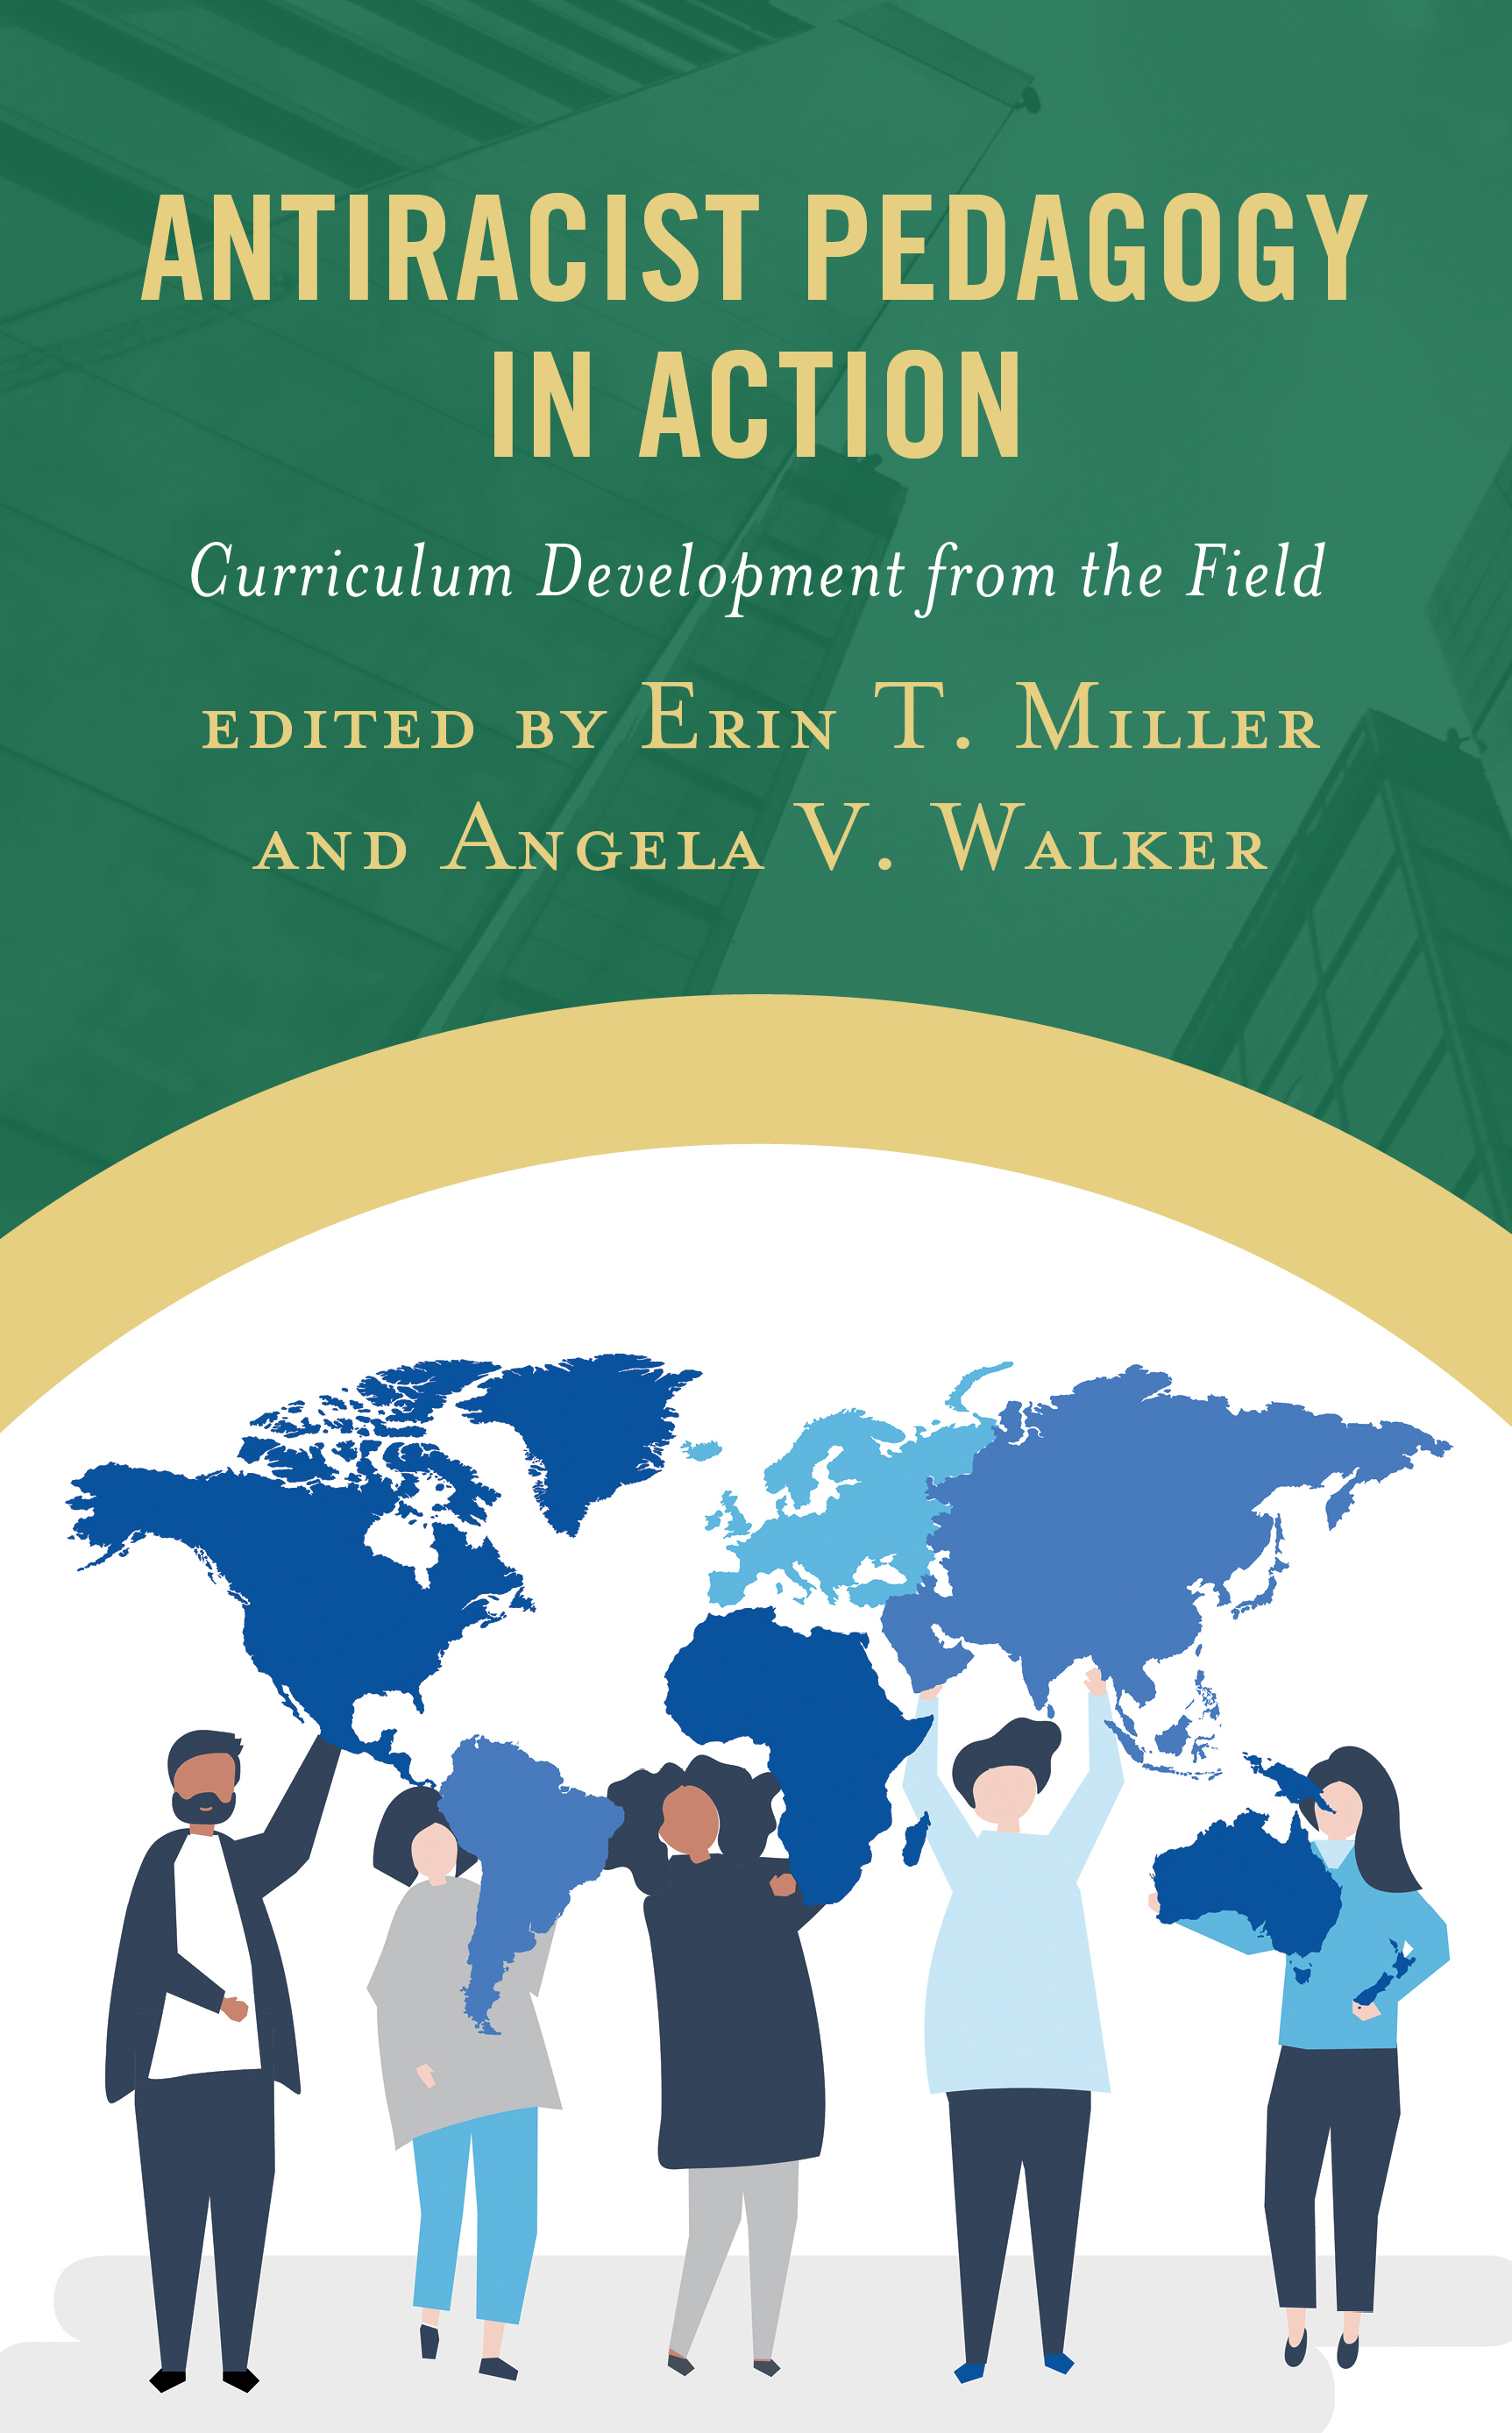 Antiracist Pedagogy in Action: Curriculum Development from the Field